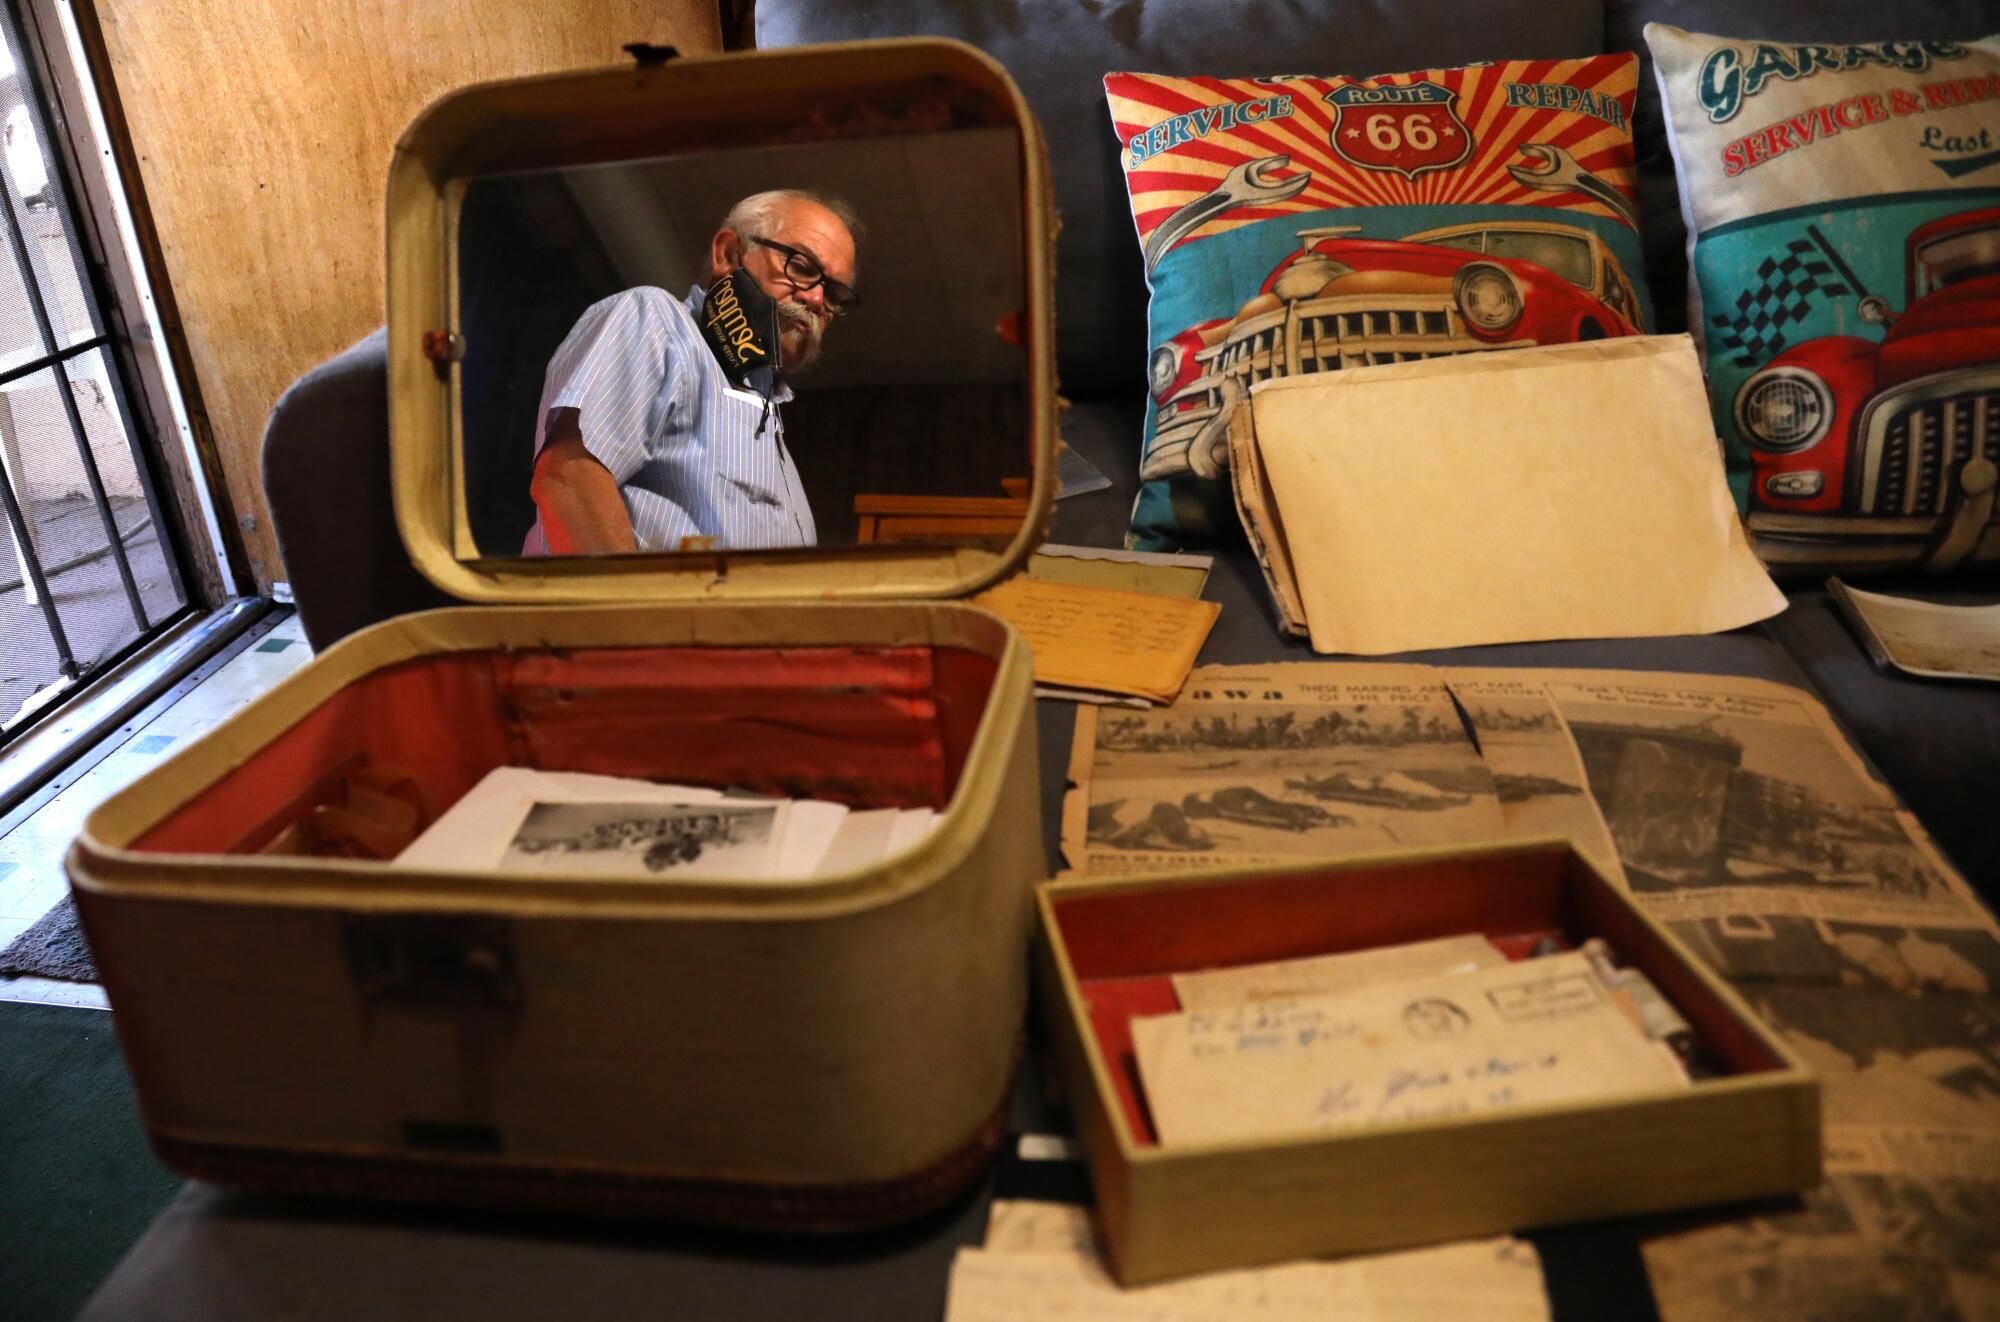 A man is reflected in the mirror of a cosmetics case containing photos and letters.